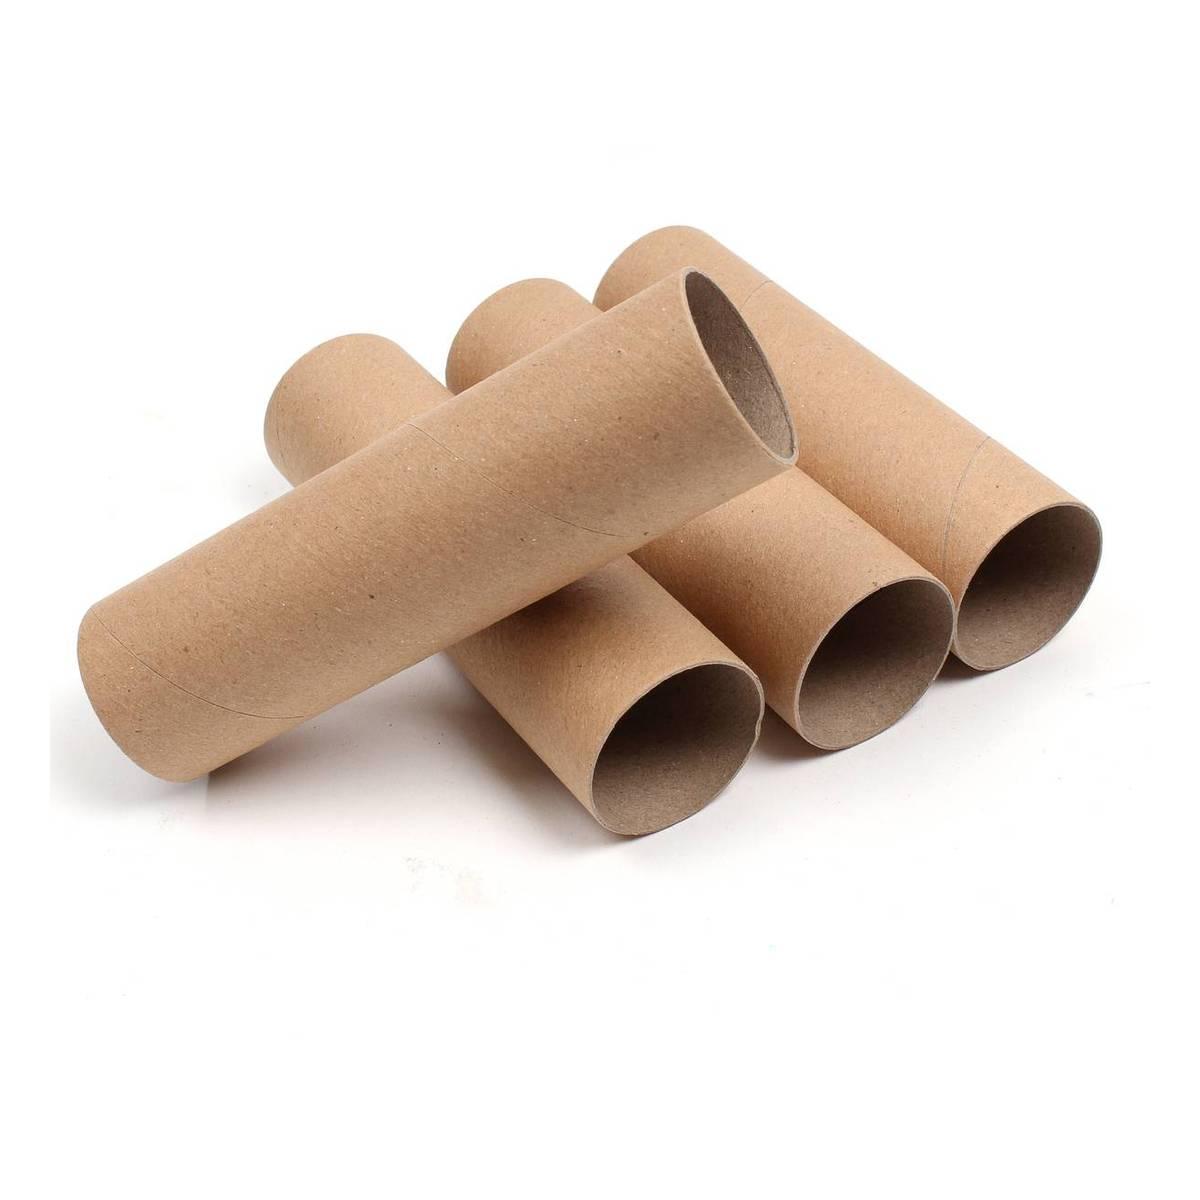 Mailing Tubes with Caps - Premium Kraft Cardboard Tubes for